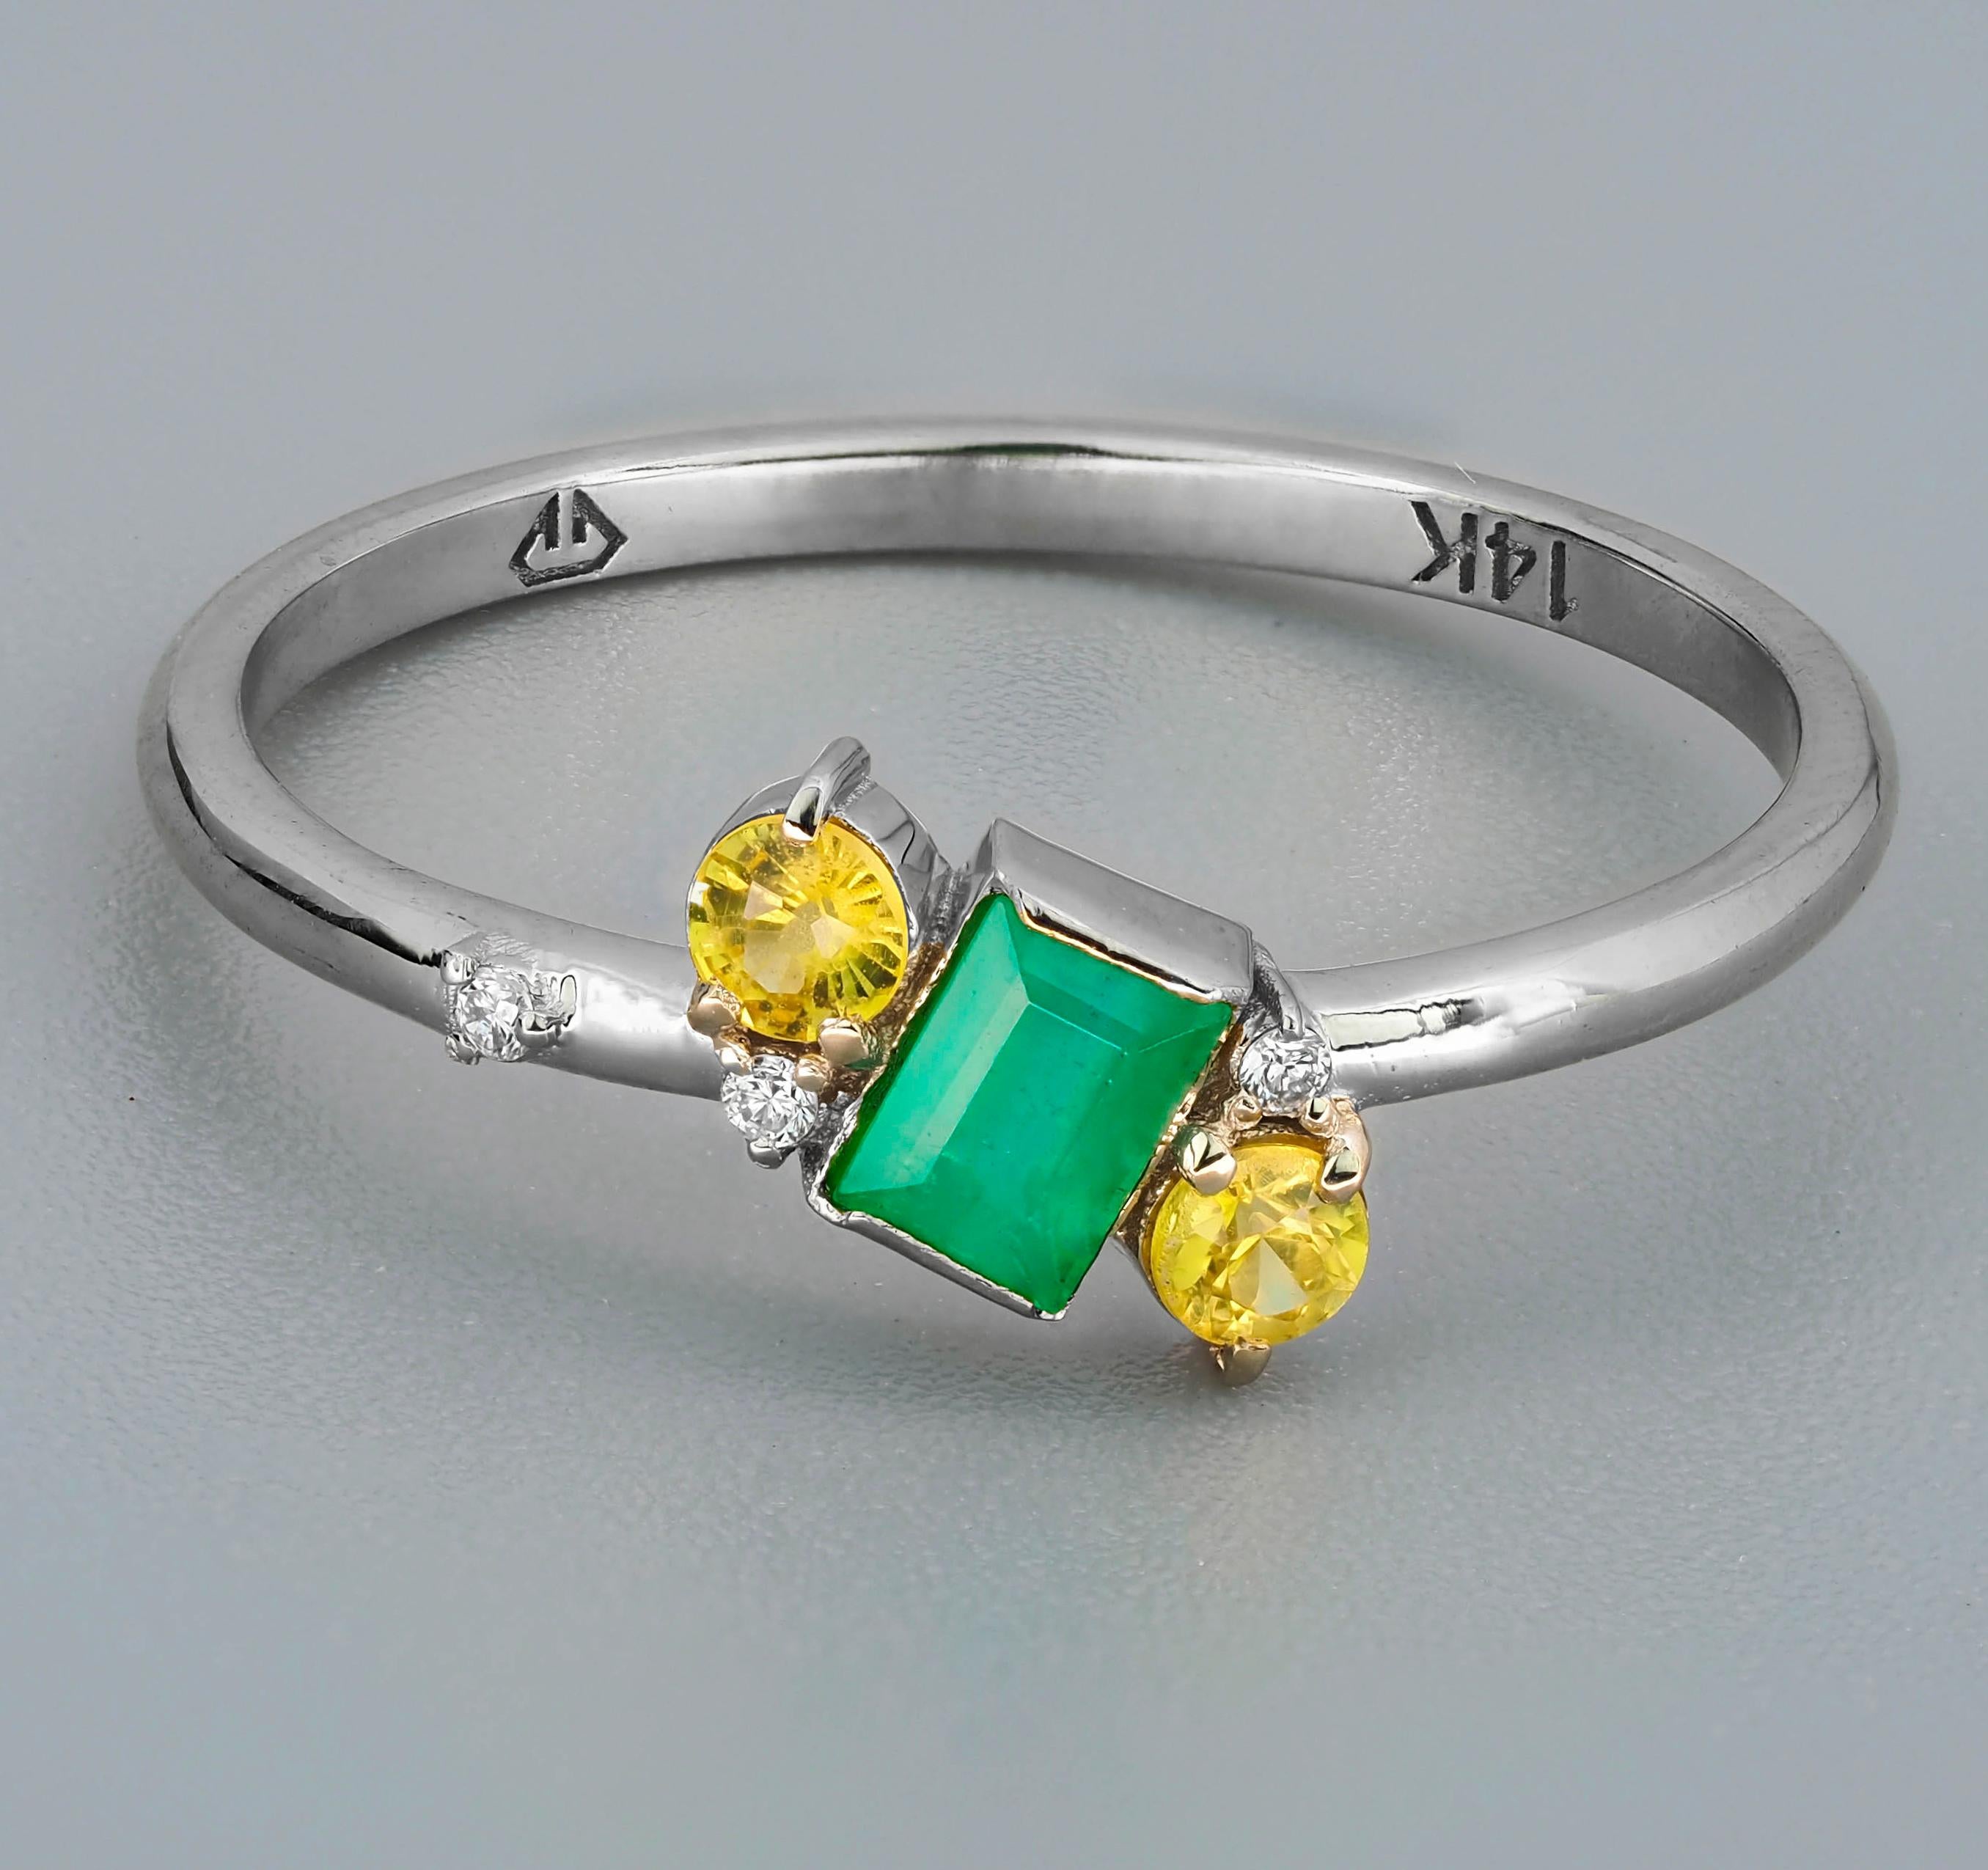 Emerald Cut 14k solid gold emerald ring.  For Sale